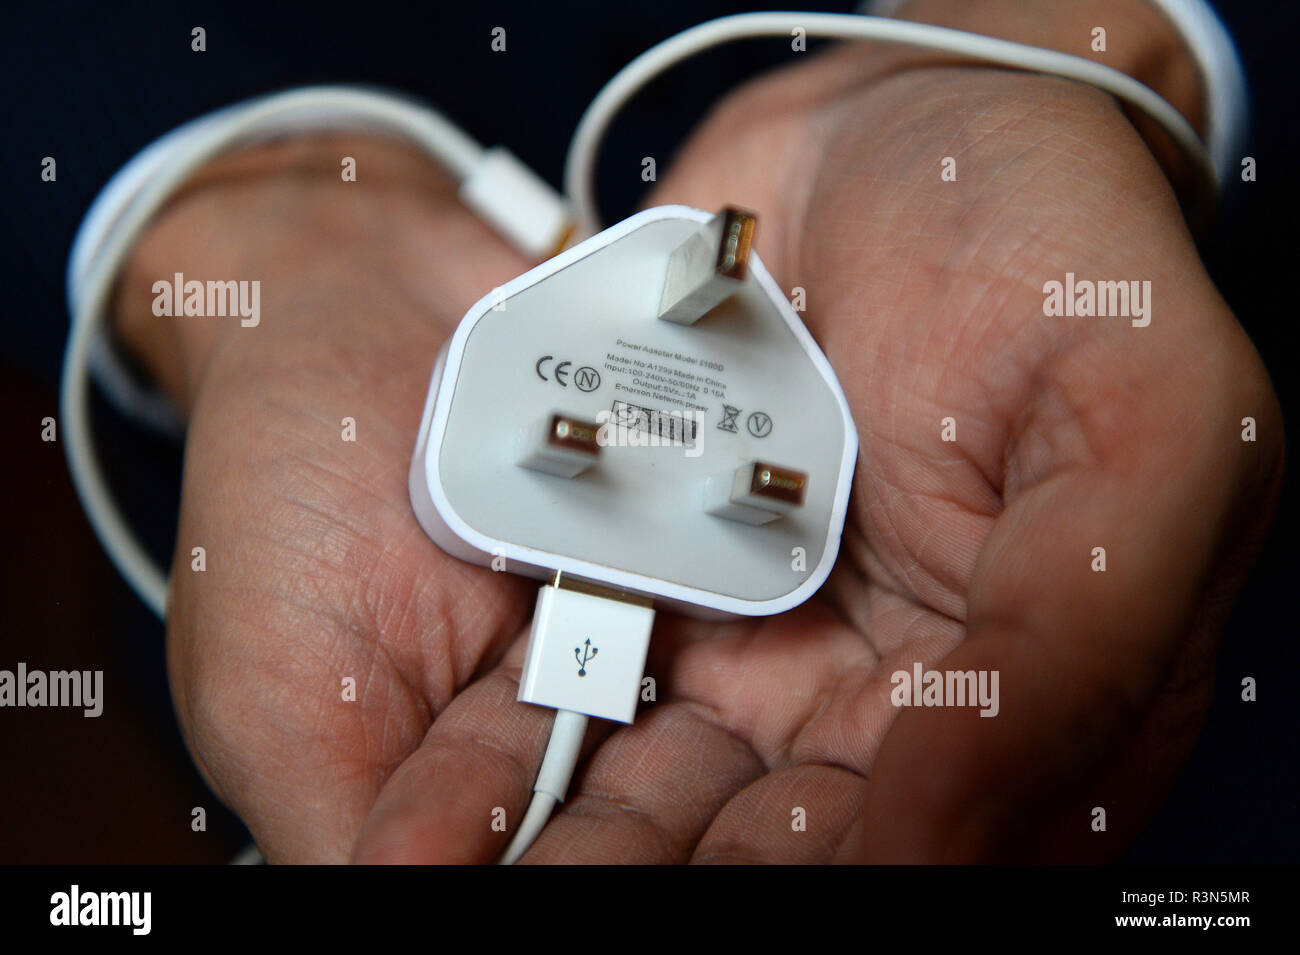 Apple Iphone Charger High Resolution Stock Photography and Images - Alamy